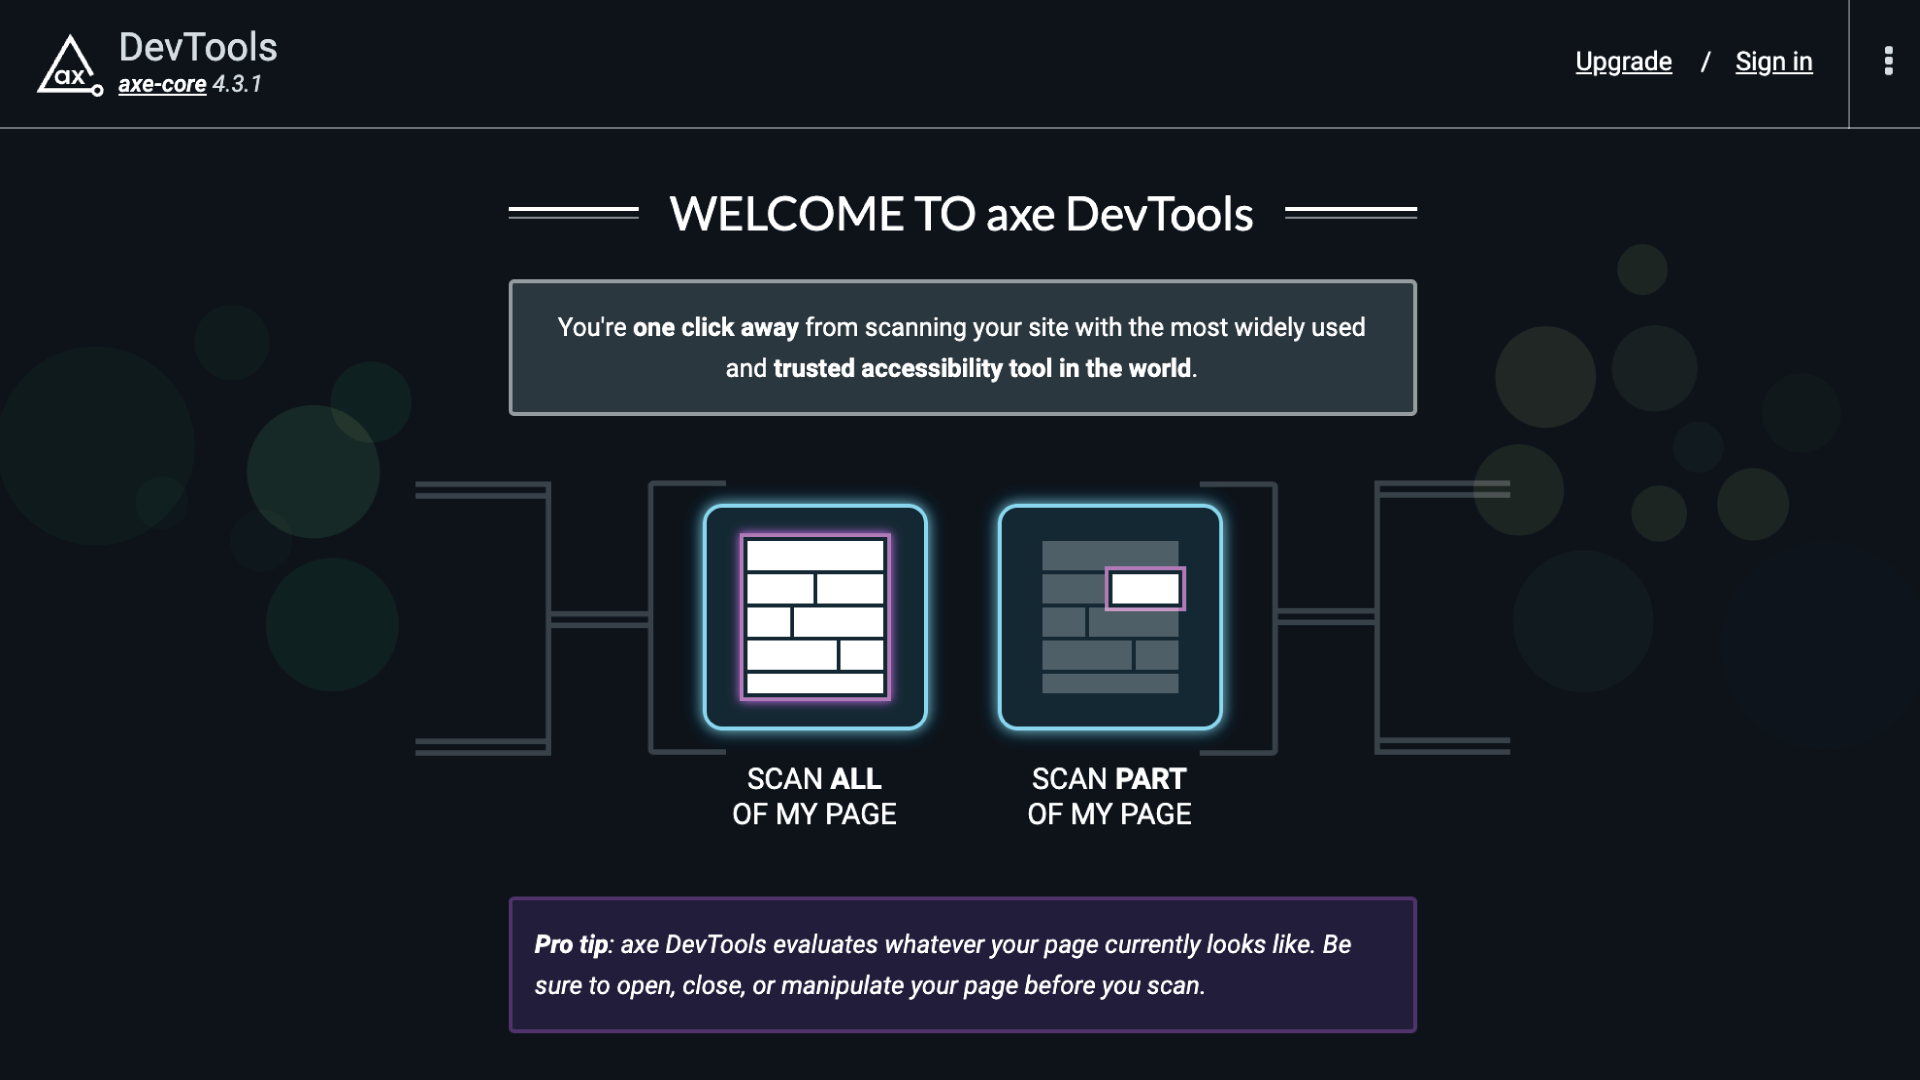 axe DevTools Welcome Page